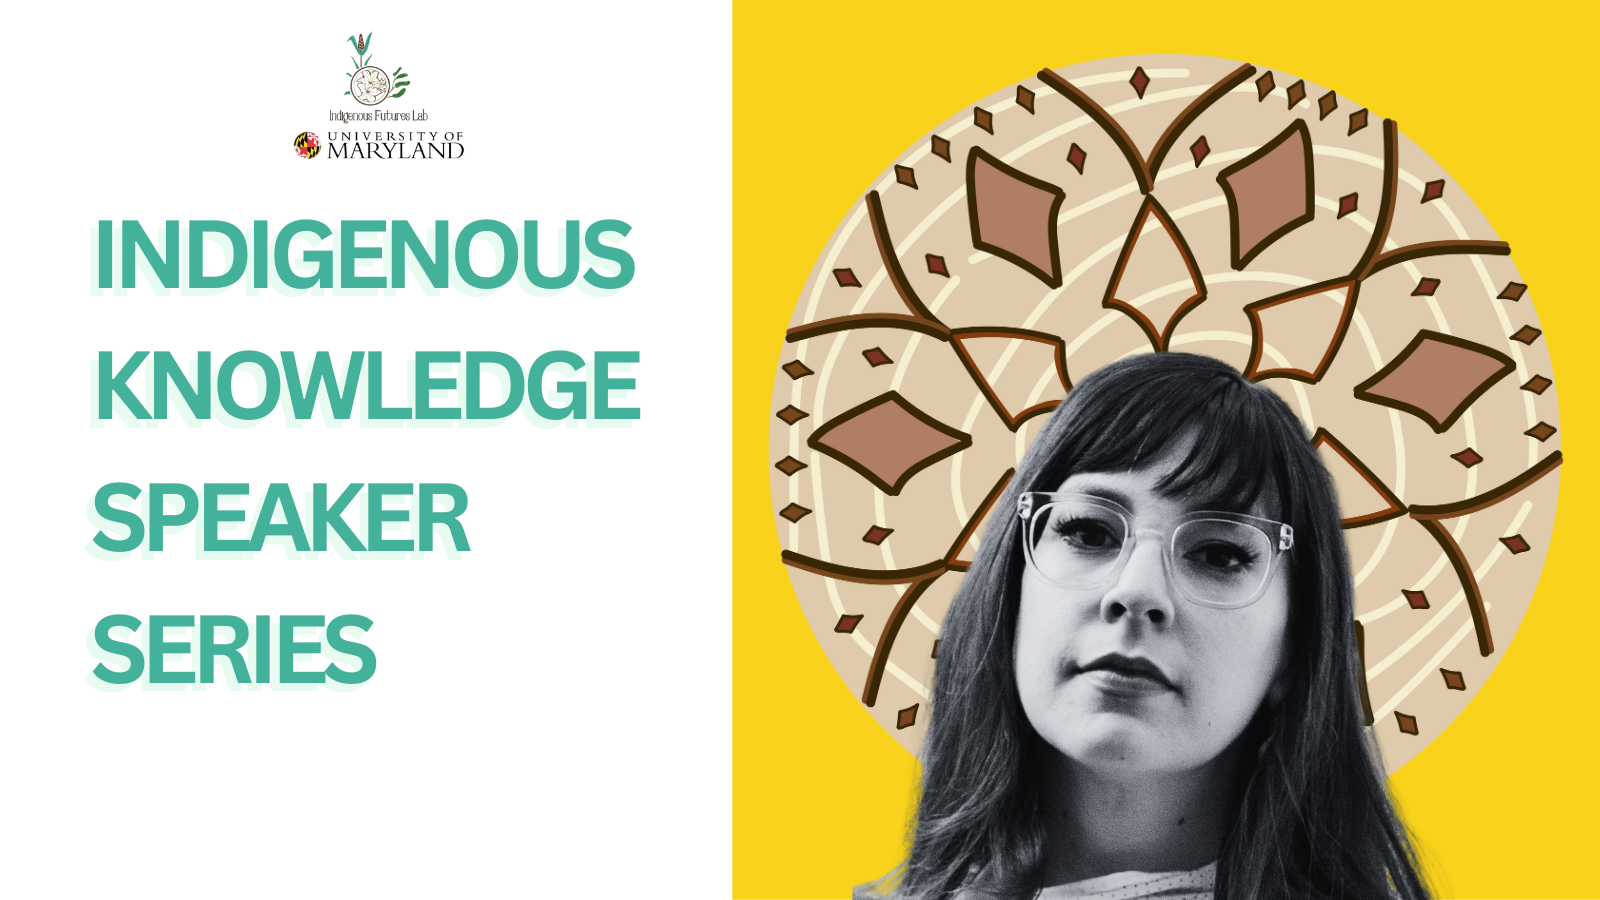 Eva Jewell in Black and white appears beside the Indigenous Knowledge Speaker Series Logo